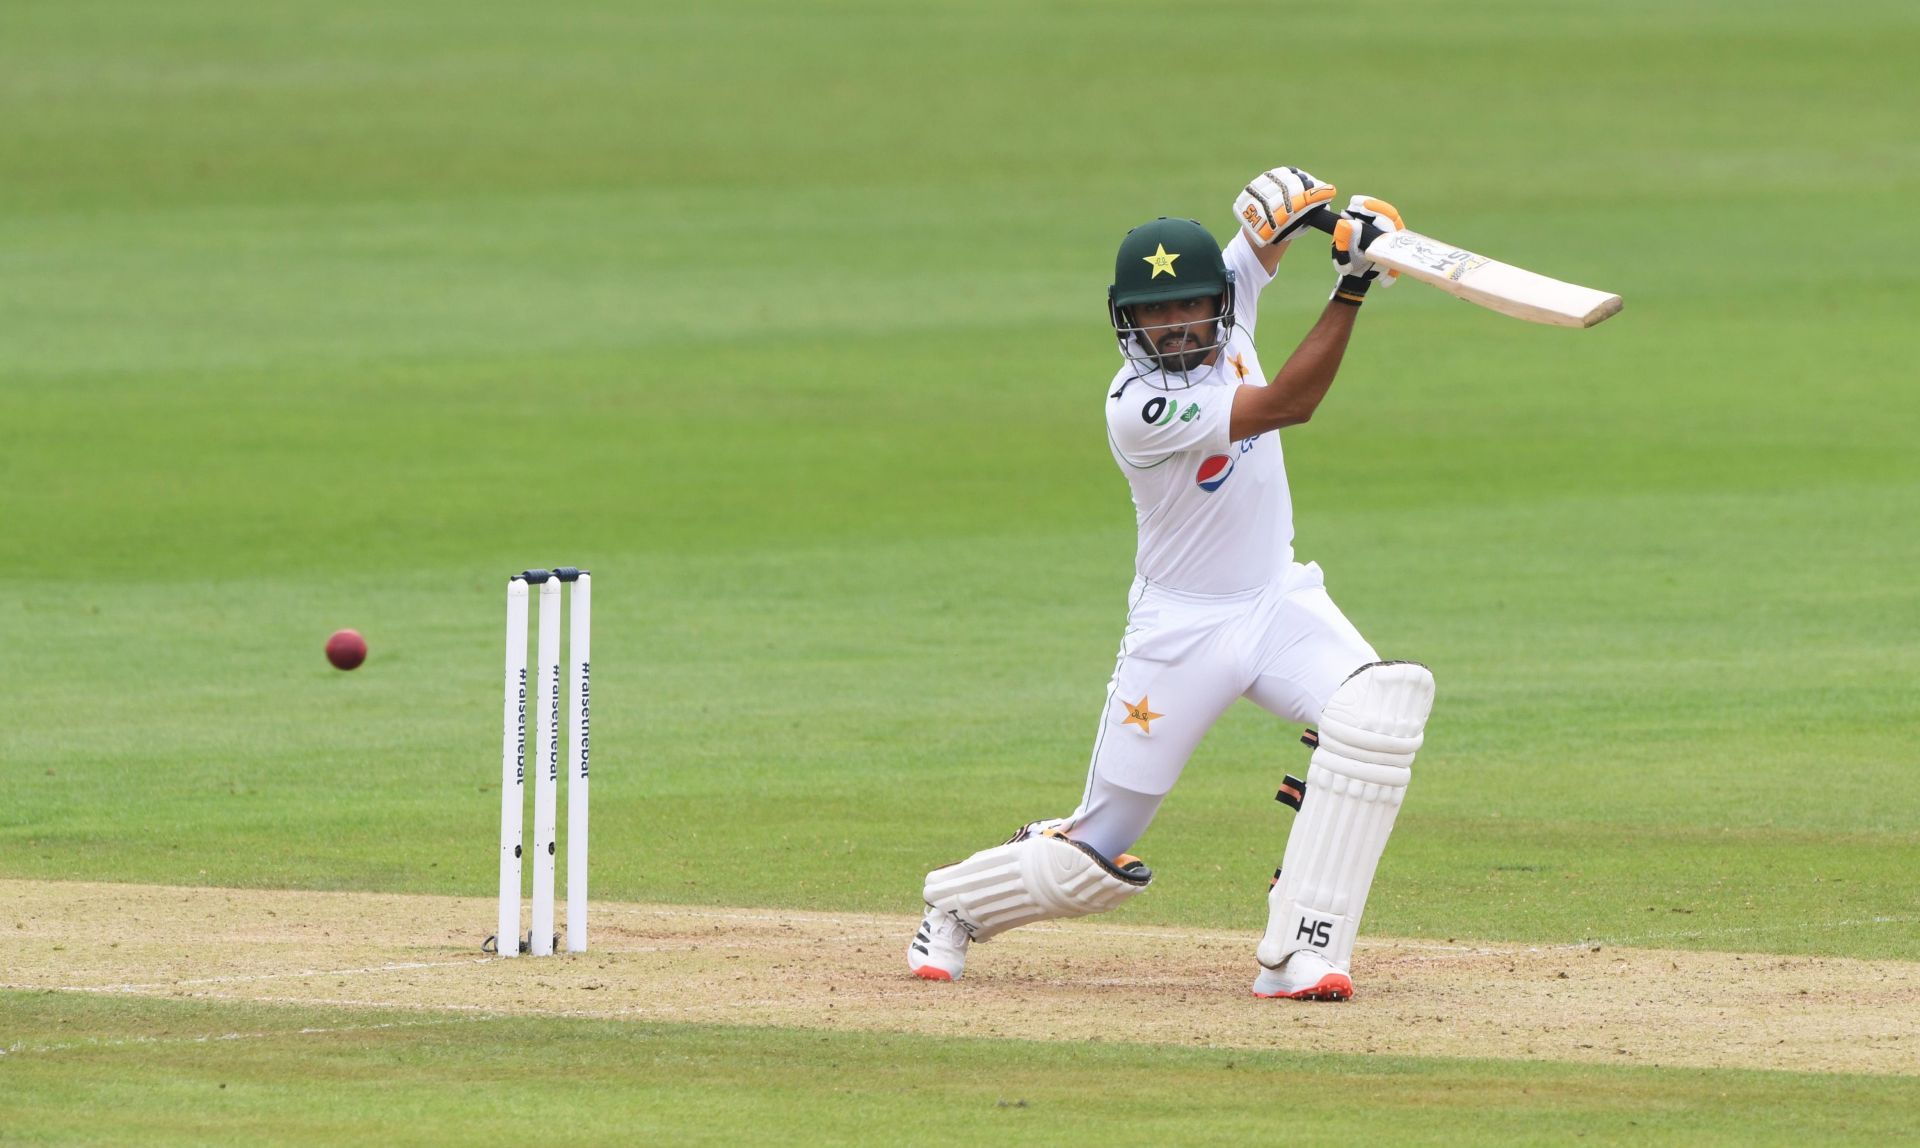 Babar Azam holds the No.3 spot in the Test batter rankings at the moment